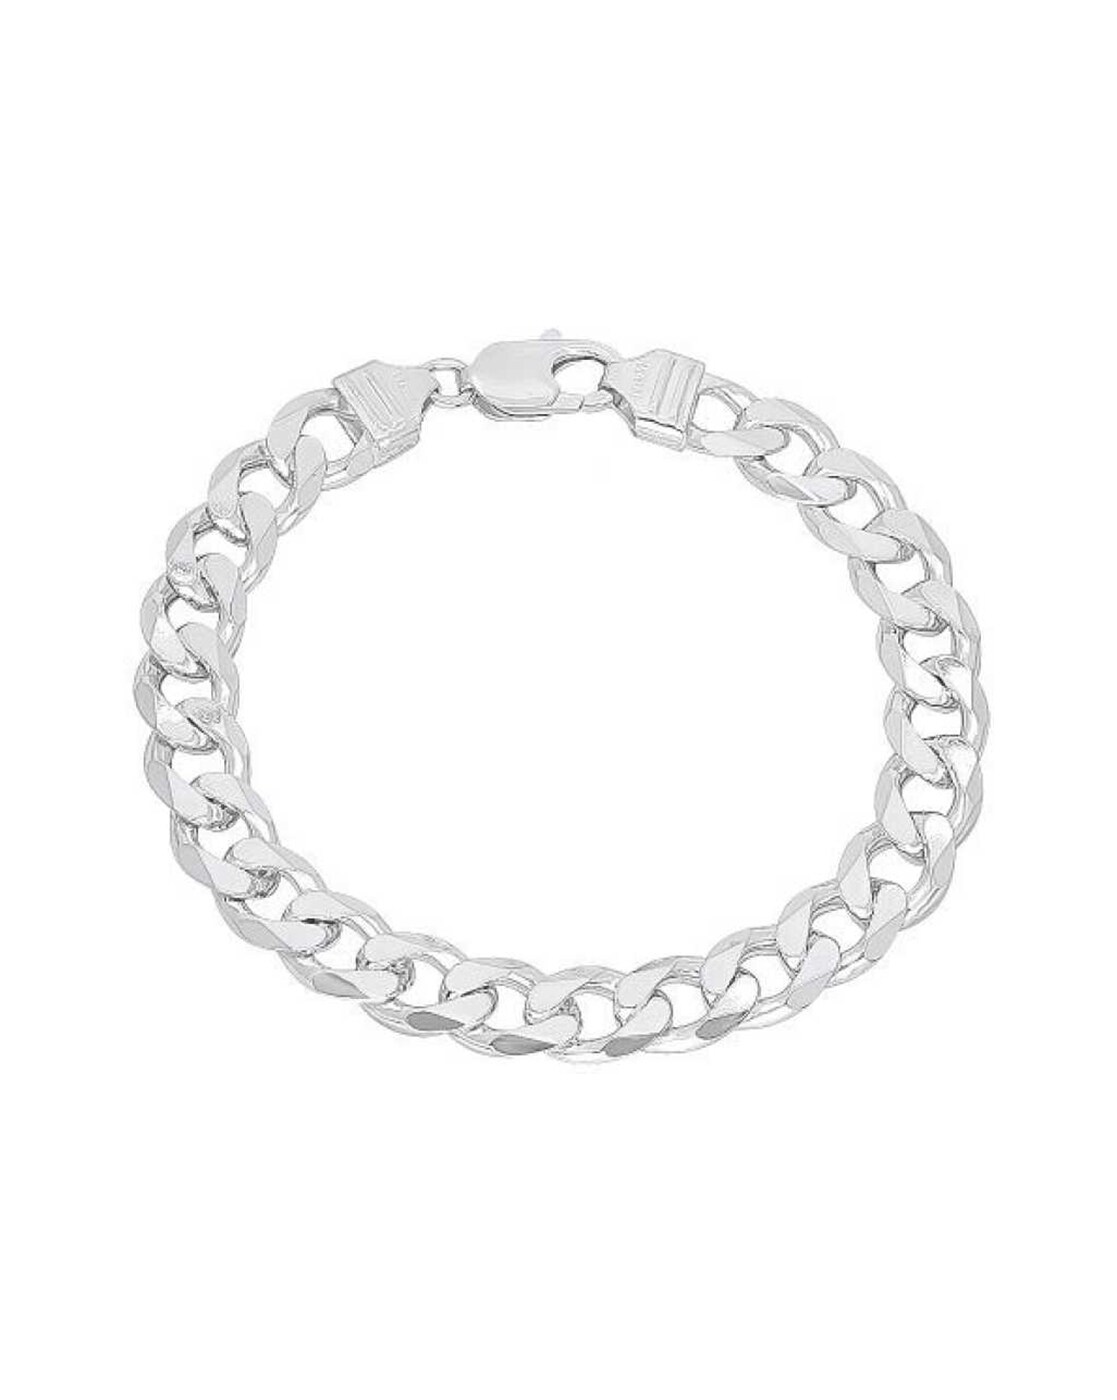 Carlton London Silver Toned Rhodium Plated Enamelled Link Bracelet Buy  Carlton London Silver Toned Rhodium Plated Enamelled Link Bracelet Online  at Best Price in India  Nykaa